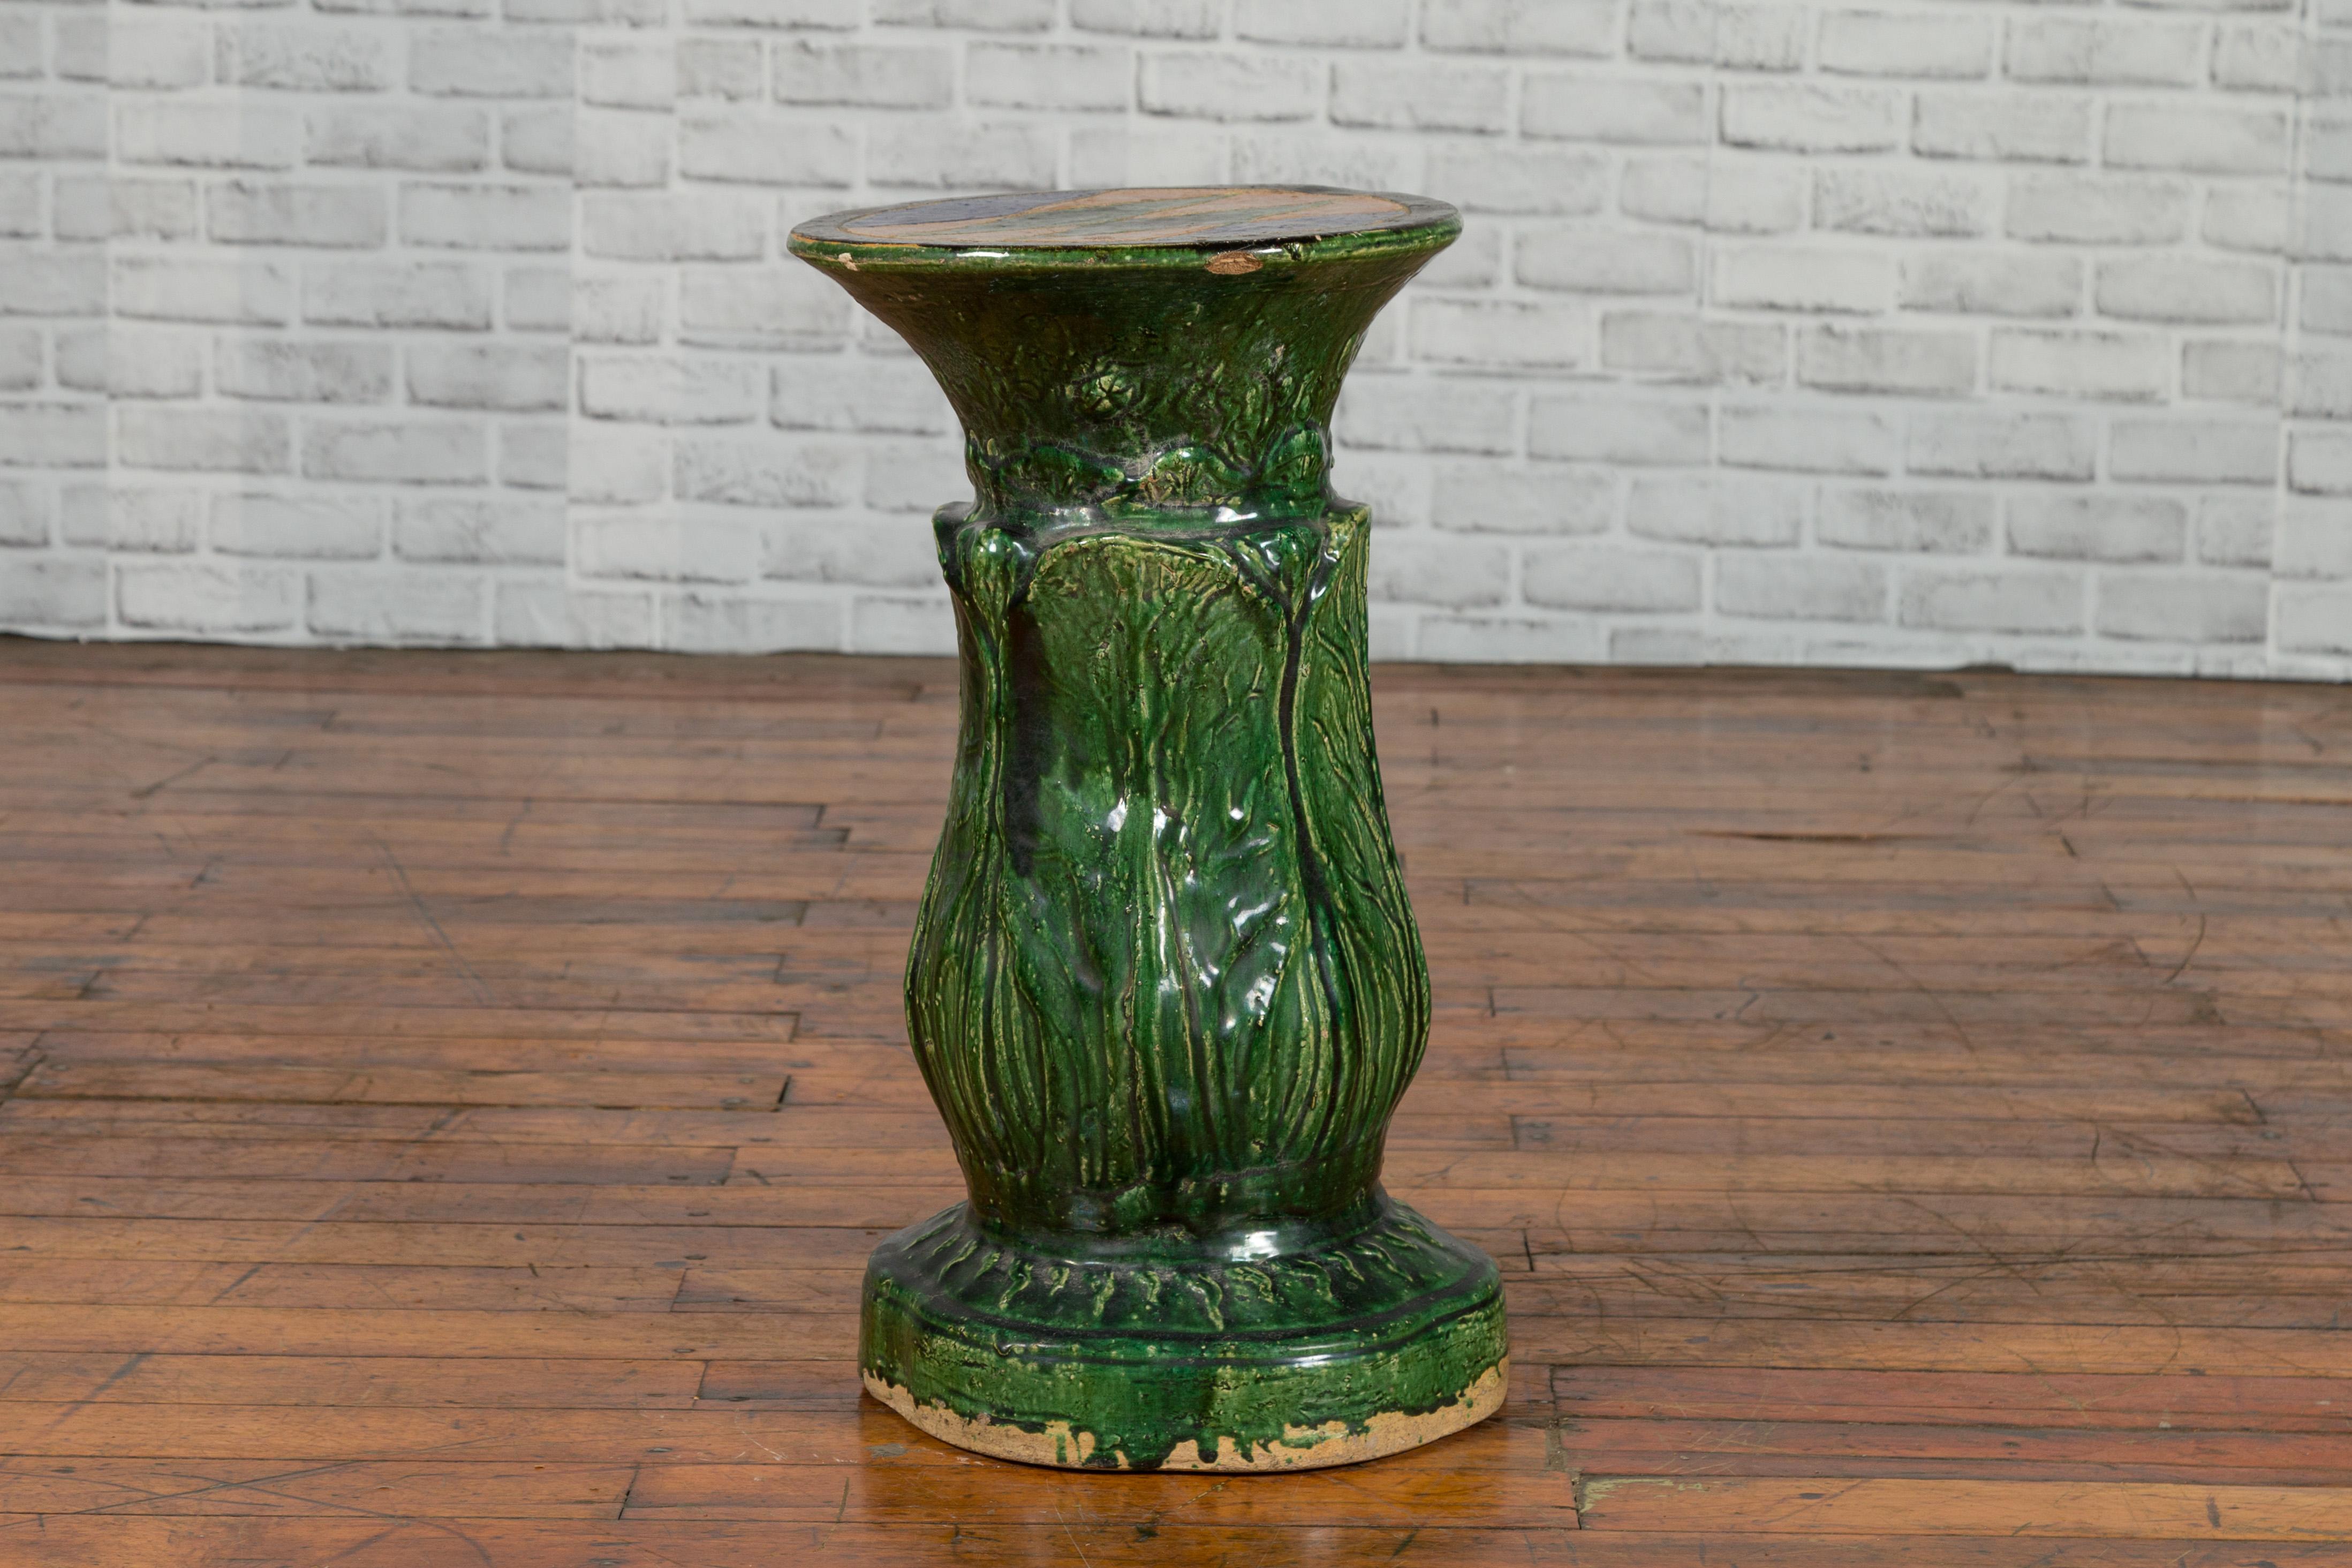 An antique Vietnamese green glazed pedestal from the early 20th century, with foliage design and diamond patterns. Created in Vietnam in the early years of the 20th century, this green glazed pedestal features a circular top adorned with blue and